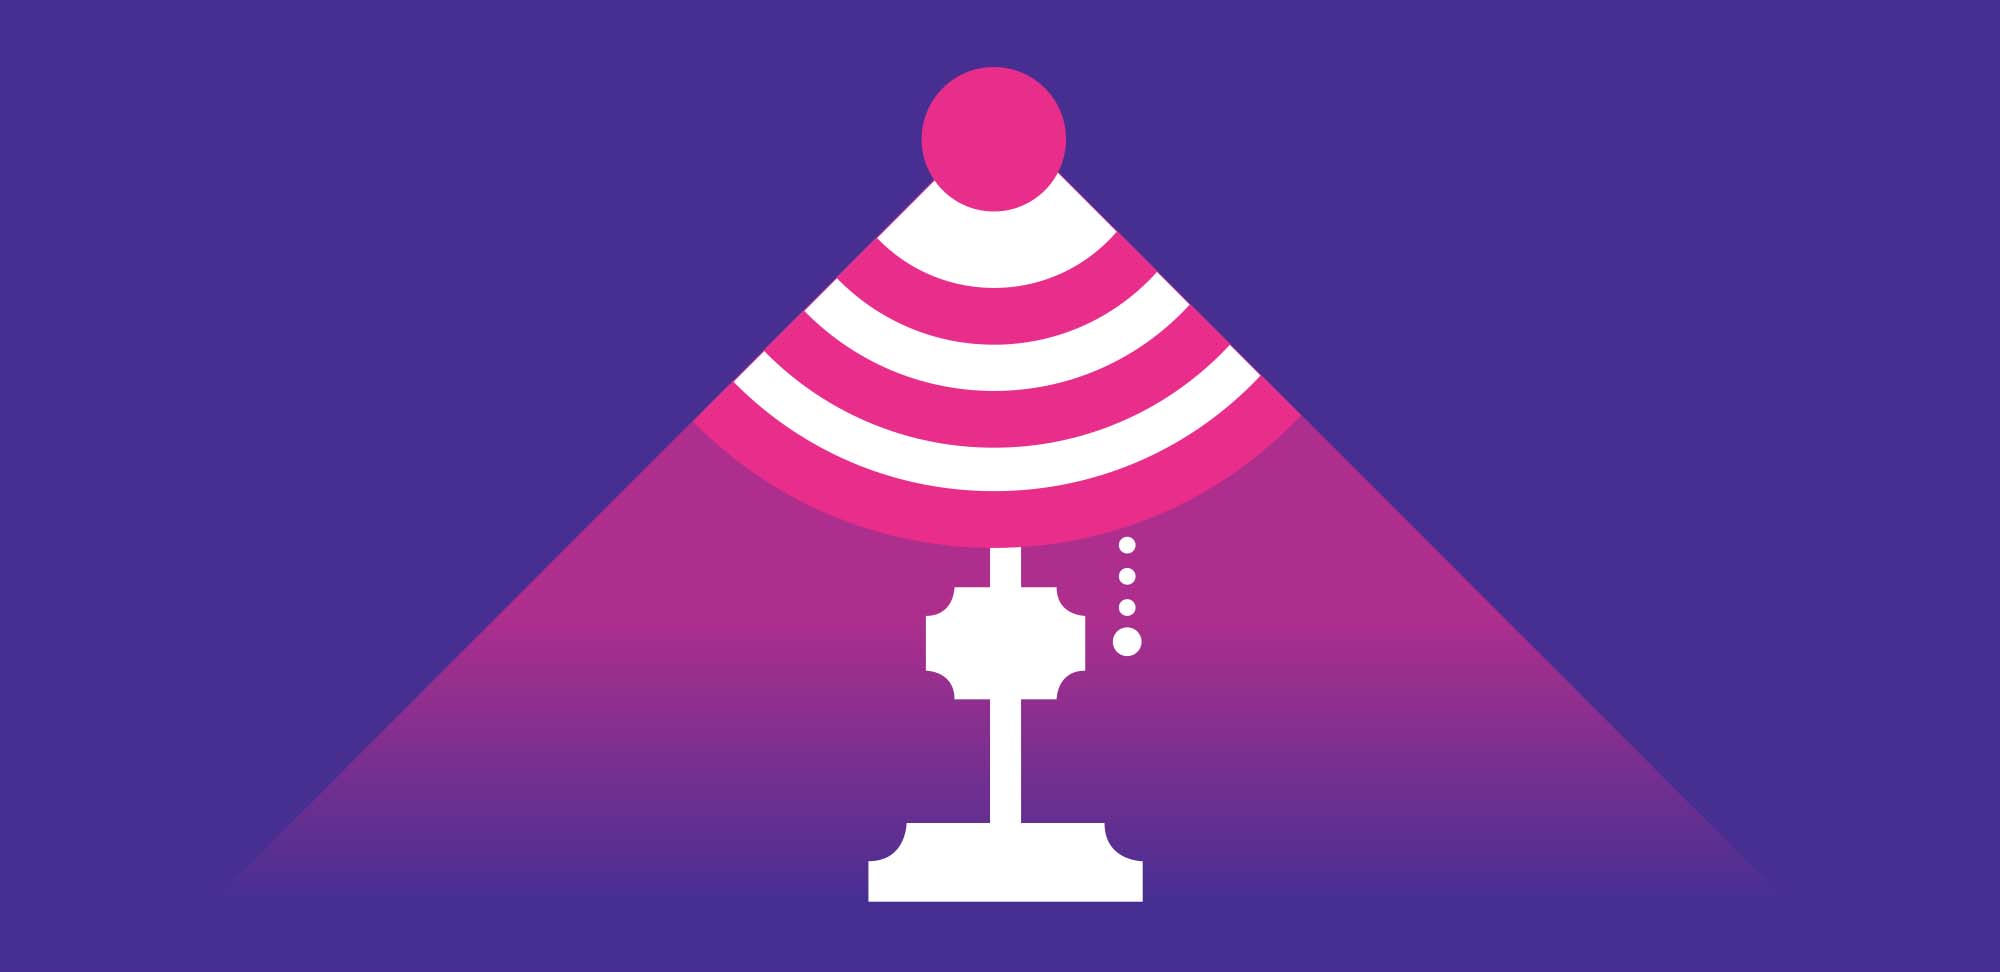 Illustration of a table lamp that has a wifi symbol as the shade